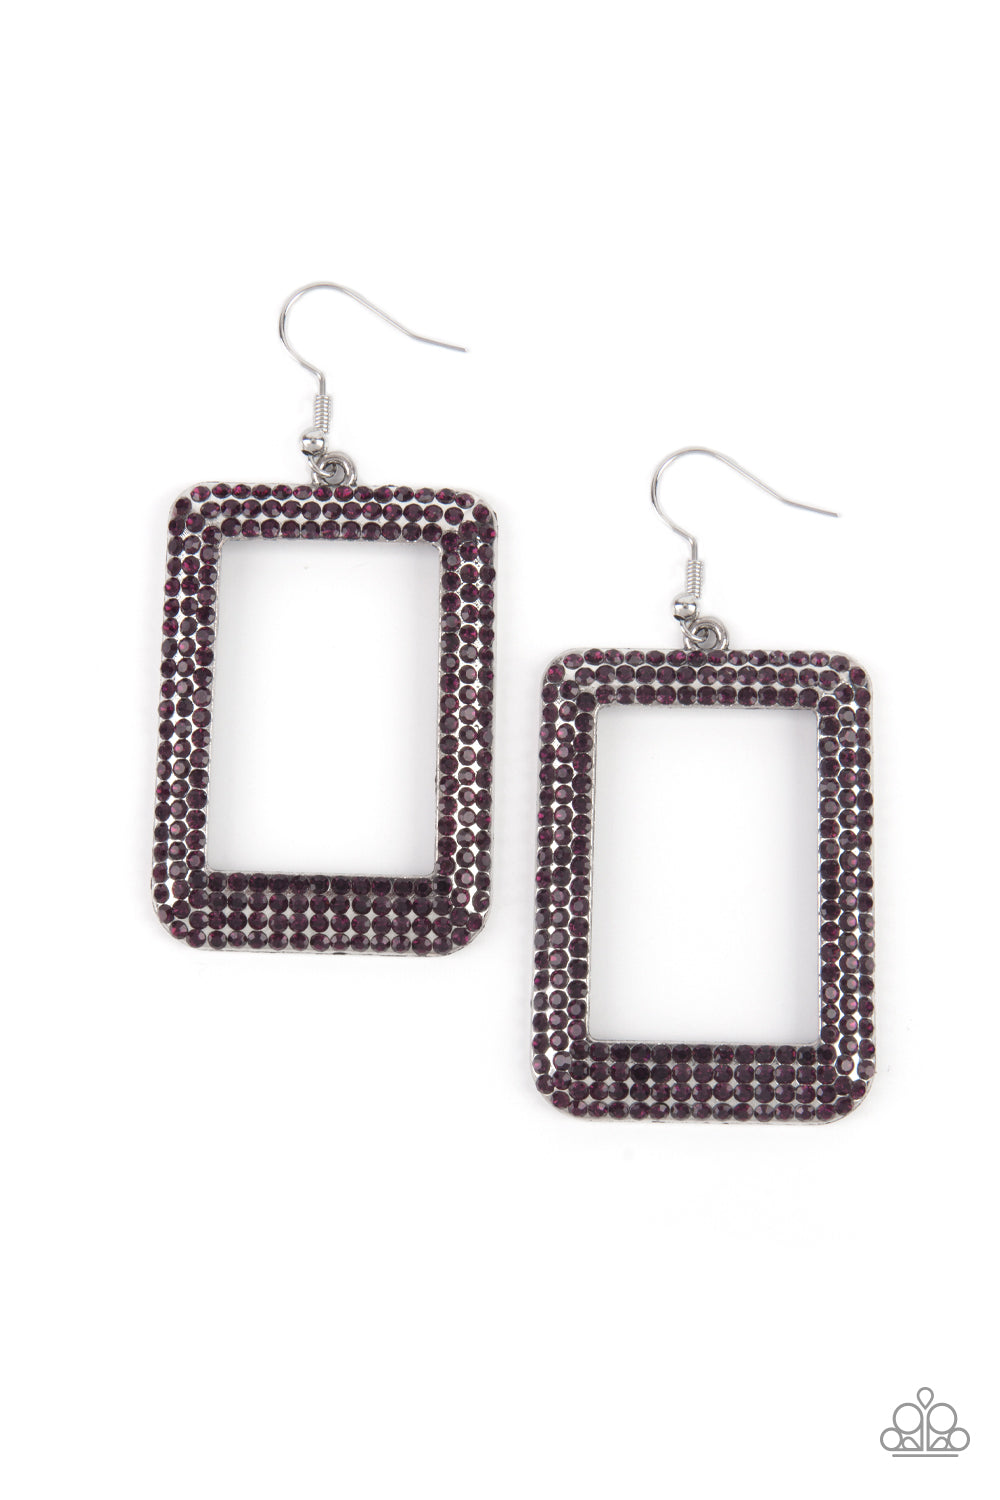 World FRAME-ous Purple Earring - Paparazzi Accessories  Bordered in rows of glittery purple rhinestones, an oversized silver rectangular frame swings from the ear for a fashionable finish. Earring attaches to a standard fishhook fitting.  All Paparazzi Accessories are lead free and nickel free!  Sold as one pair of earrings.